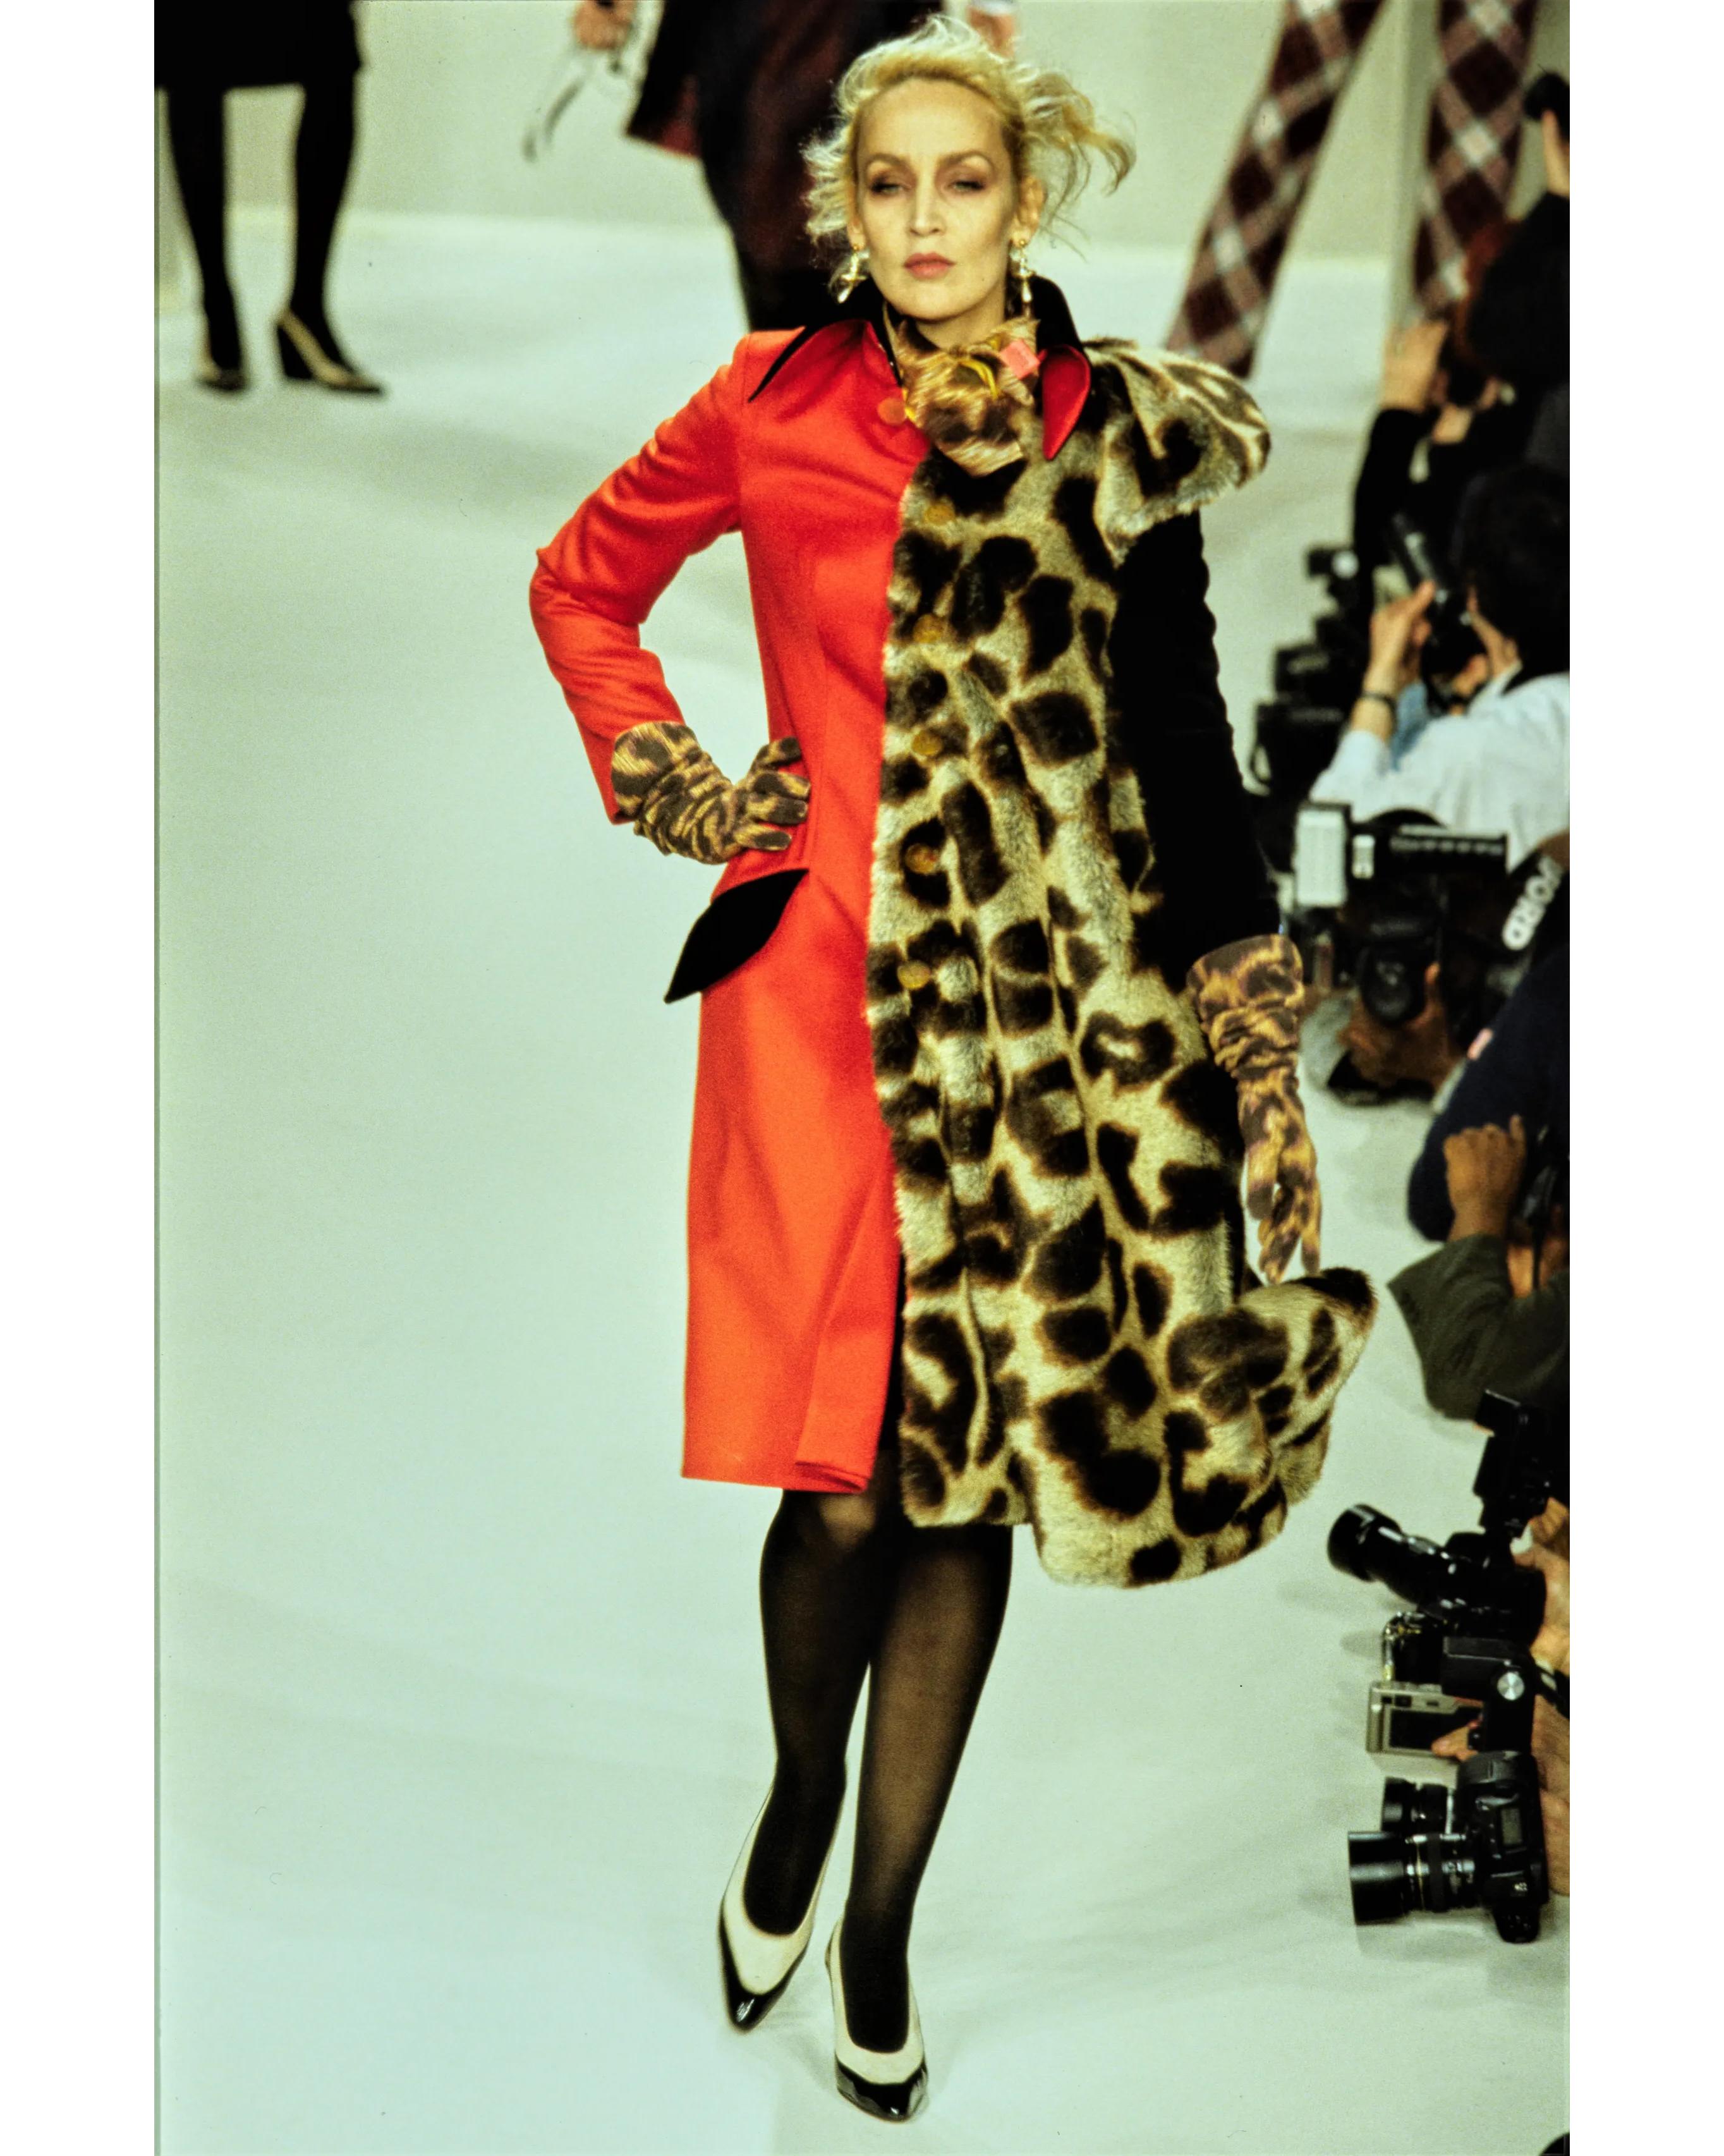 A/W 1996 Vivienne Westwood Gold Label 'Storm in a Teacup' Collection red and leopard print contrast knee length coat. Right side features red coat, and left side features contrasting leopard faux fur short sleeve overlay with black velvet long